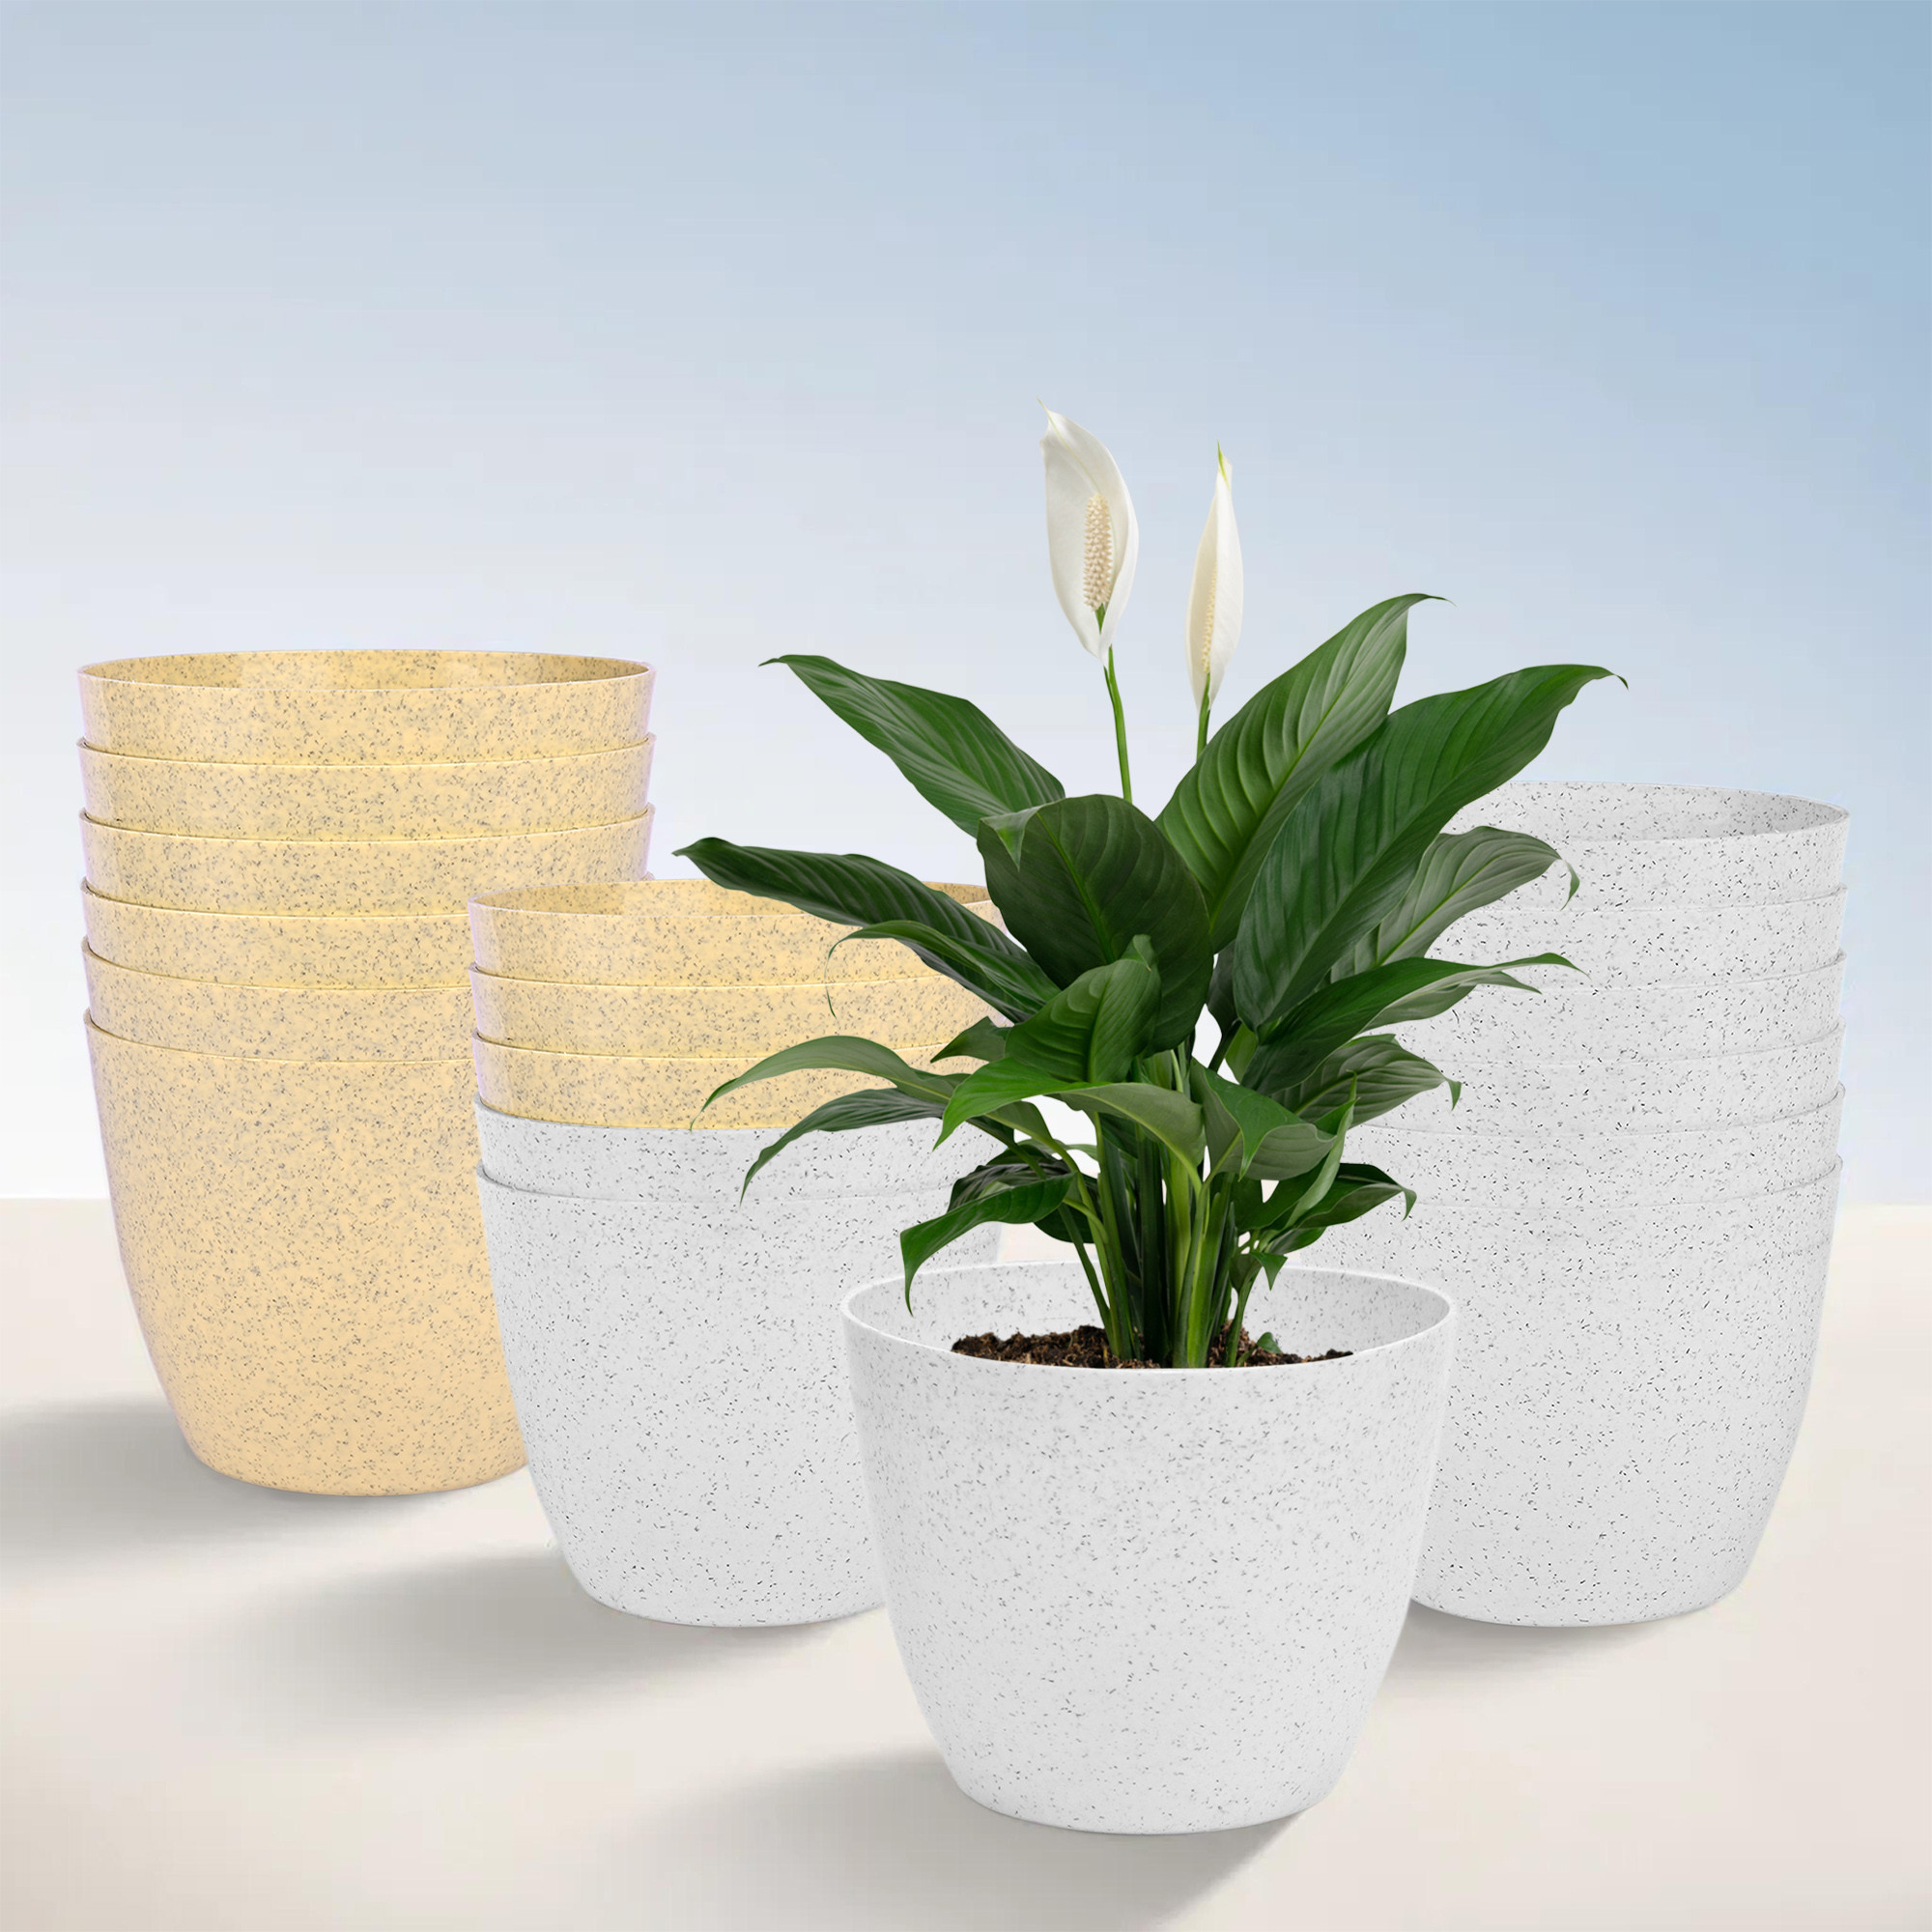 Kuber Industries Flower Pot | Flower Pot for Living Room-Office | Flower Planters for Home-office-Lawns & Garden Décor | Planters Pots for Balcony | Marble Cool | 5 Inch | White & Beige